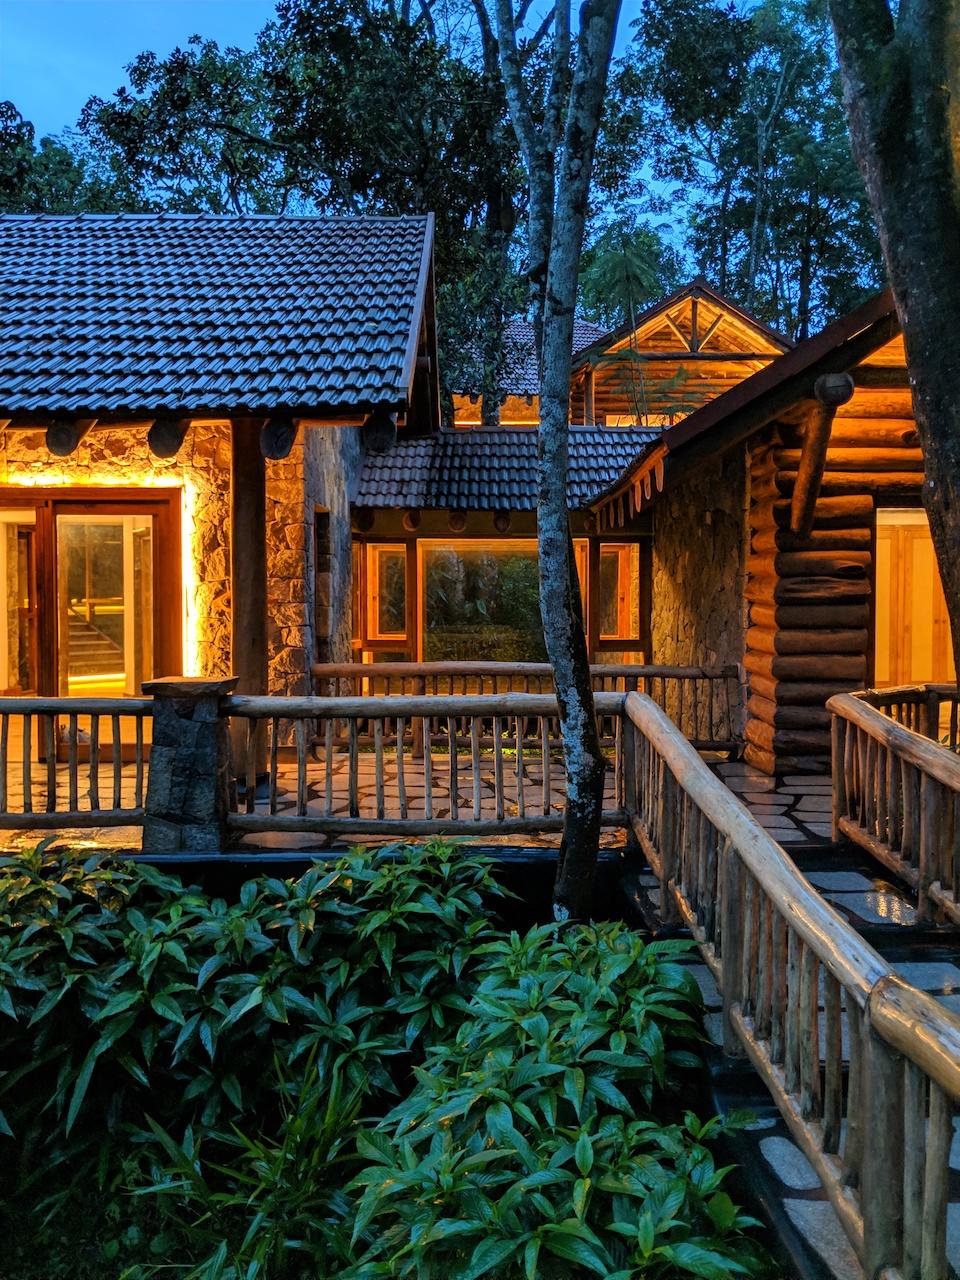 “It’s like stepping into a fairy tale!”: A Magical Wooden Lodge in Wayanad